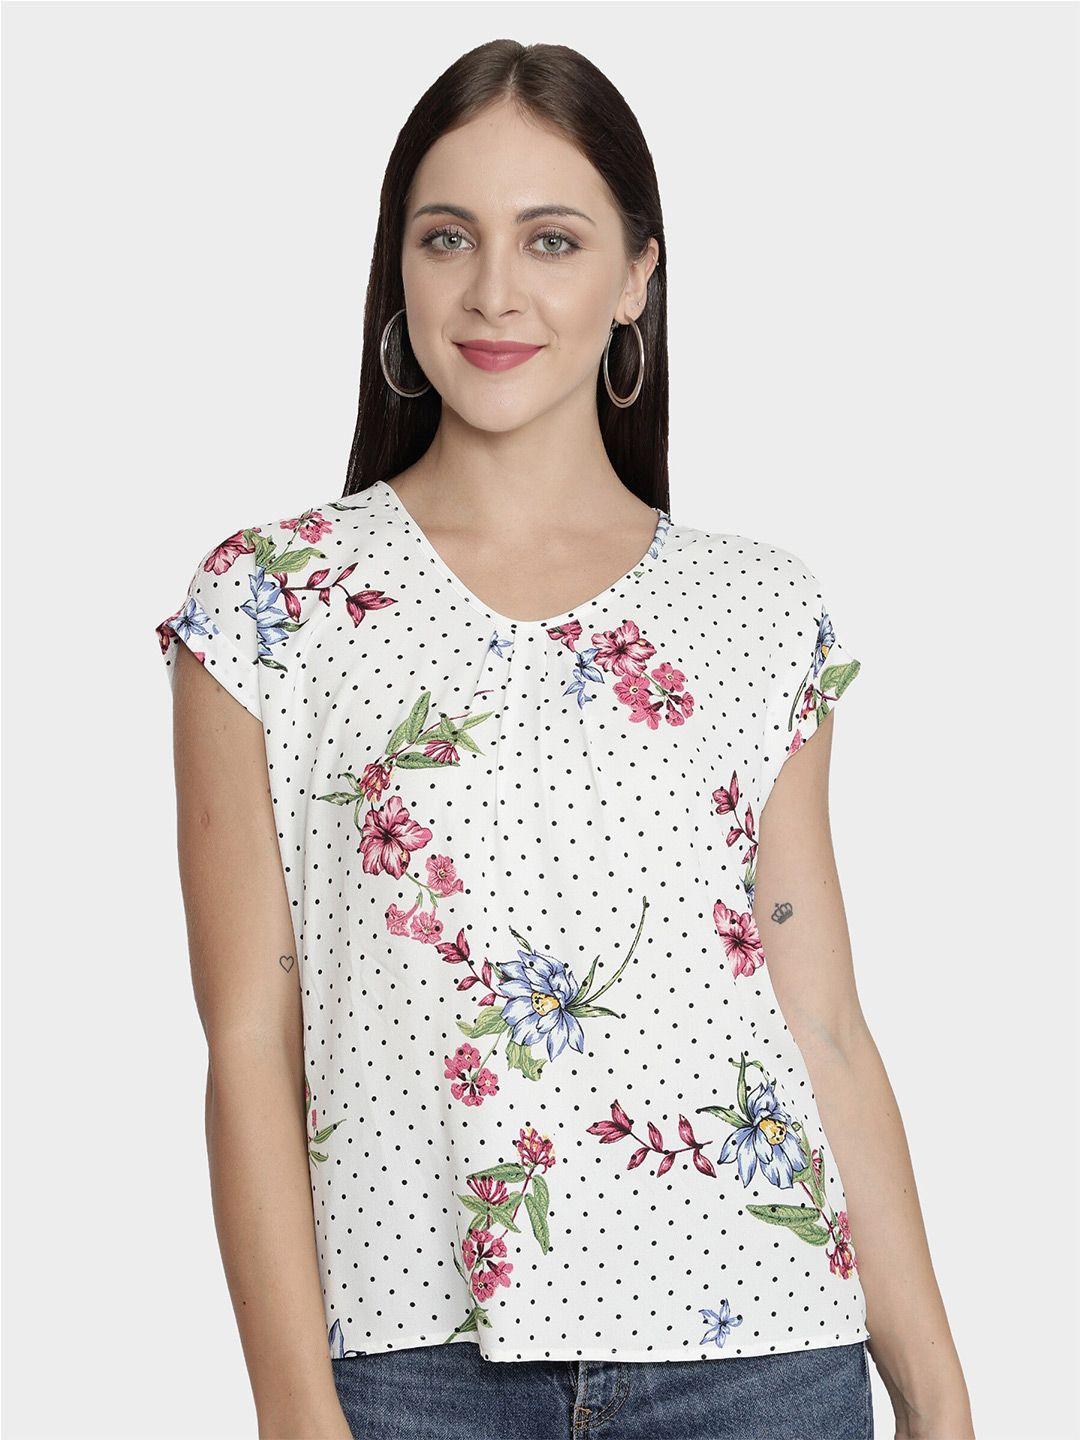 nuevosdamas women white & pink floral print extended sleeves crepe top